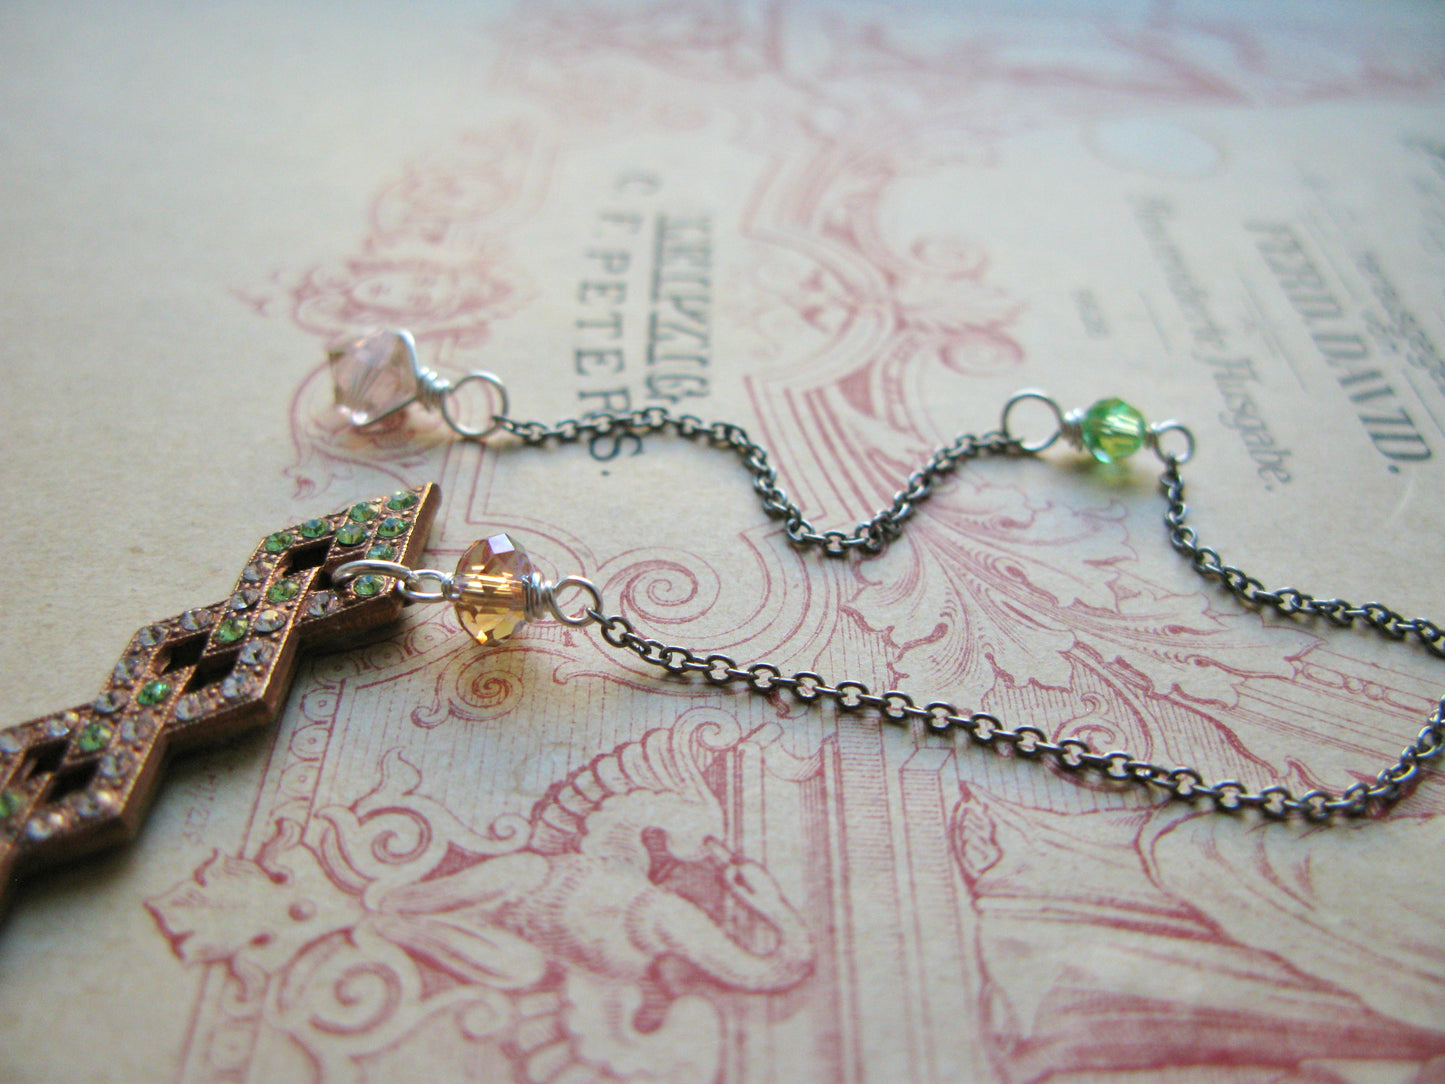 Way To Go pendant necklace in peridot+silk